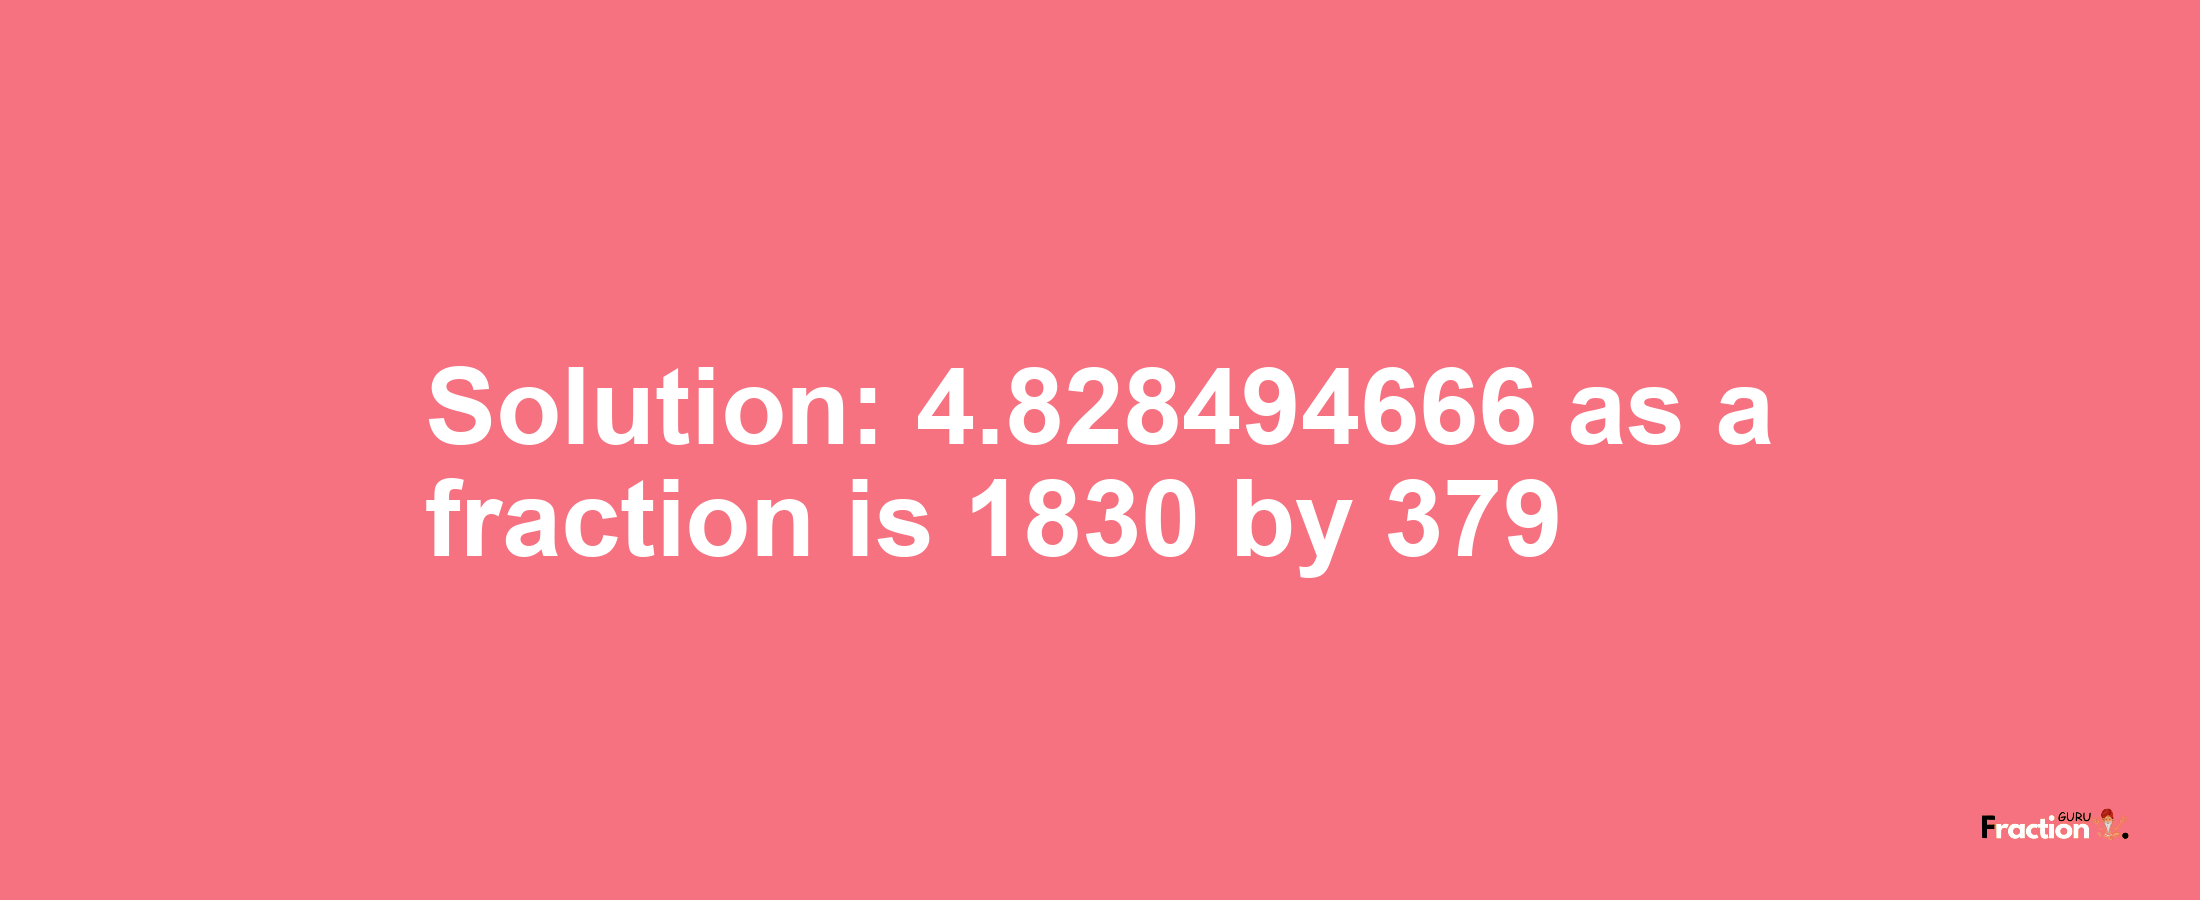 Solution:4.828494666 as a fraction is 1830/379